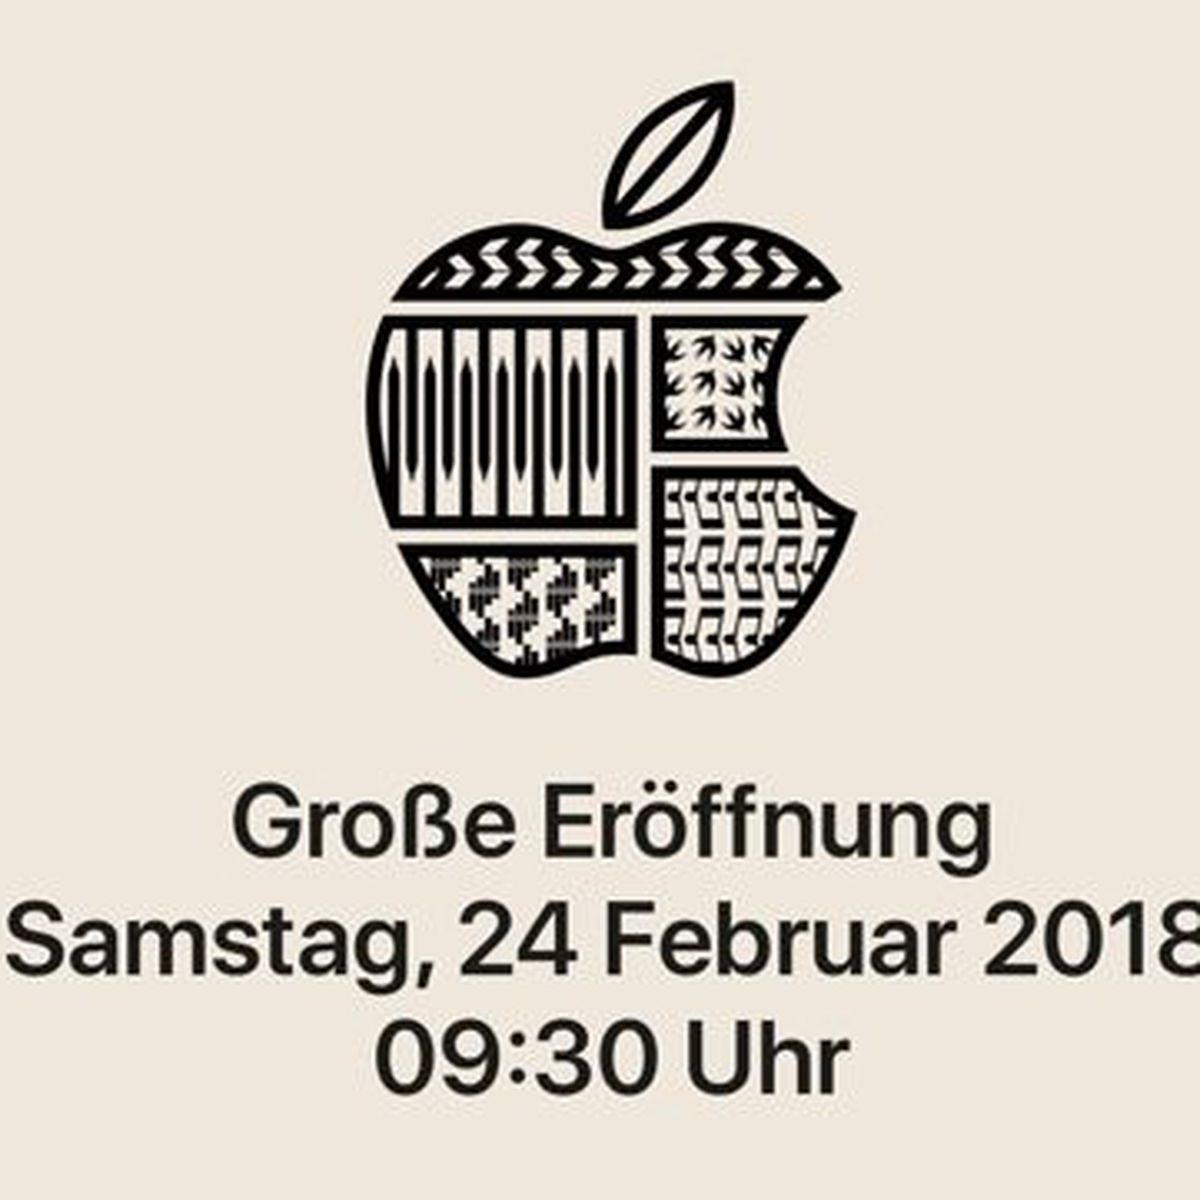 Apple to Open New Retail Store in Vienna, Austria on February 24